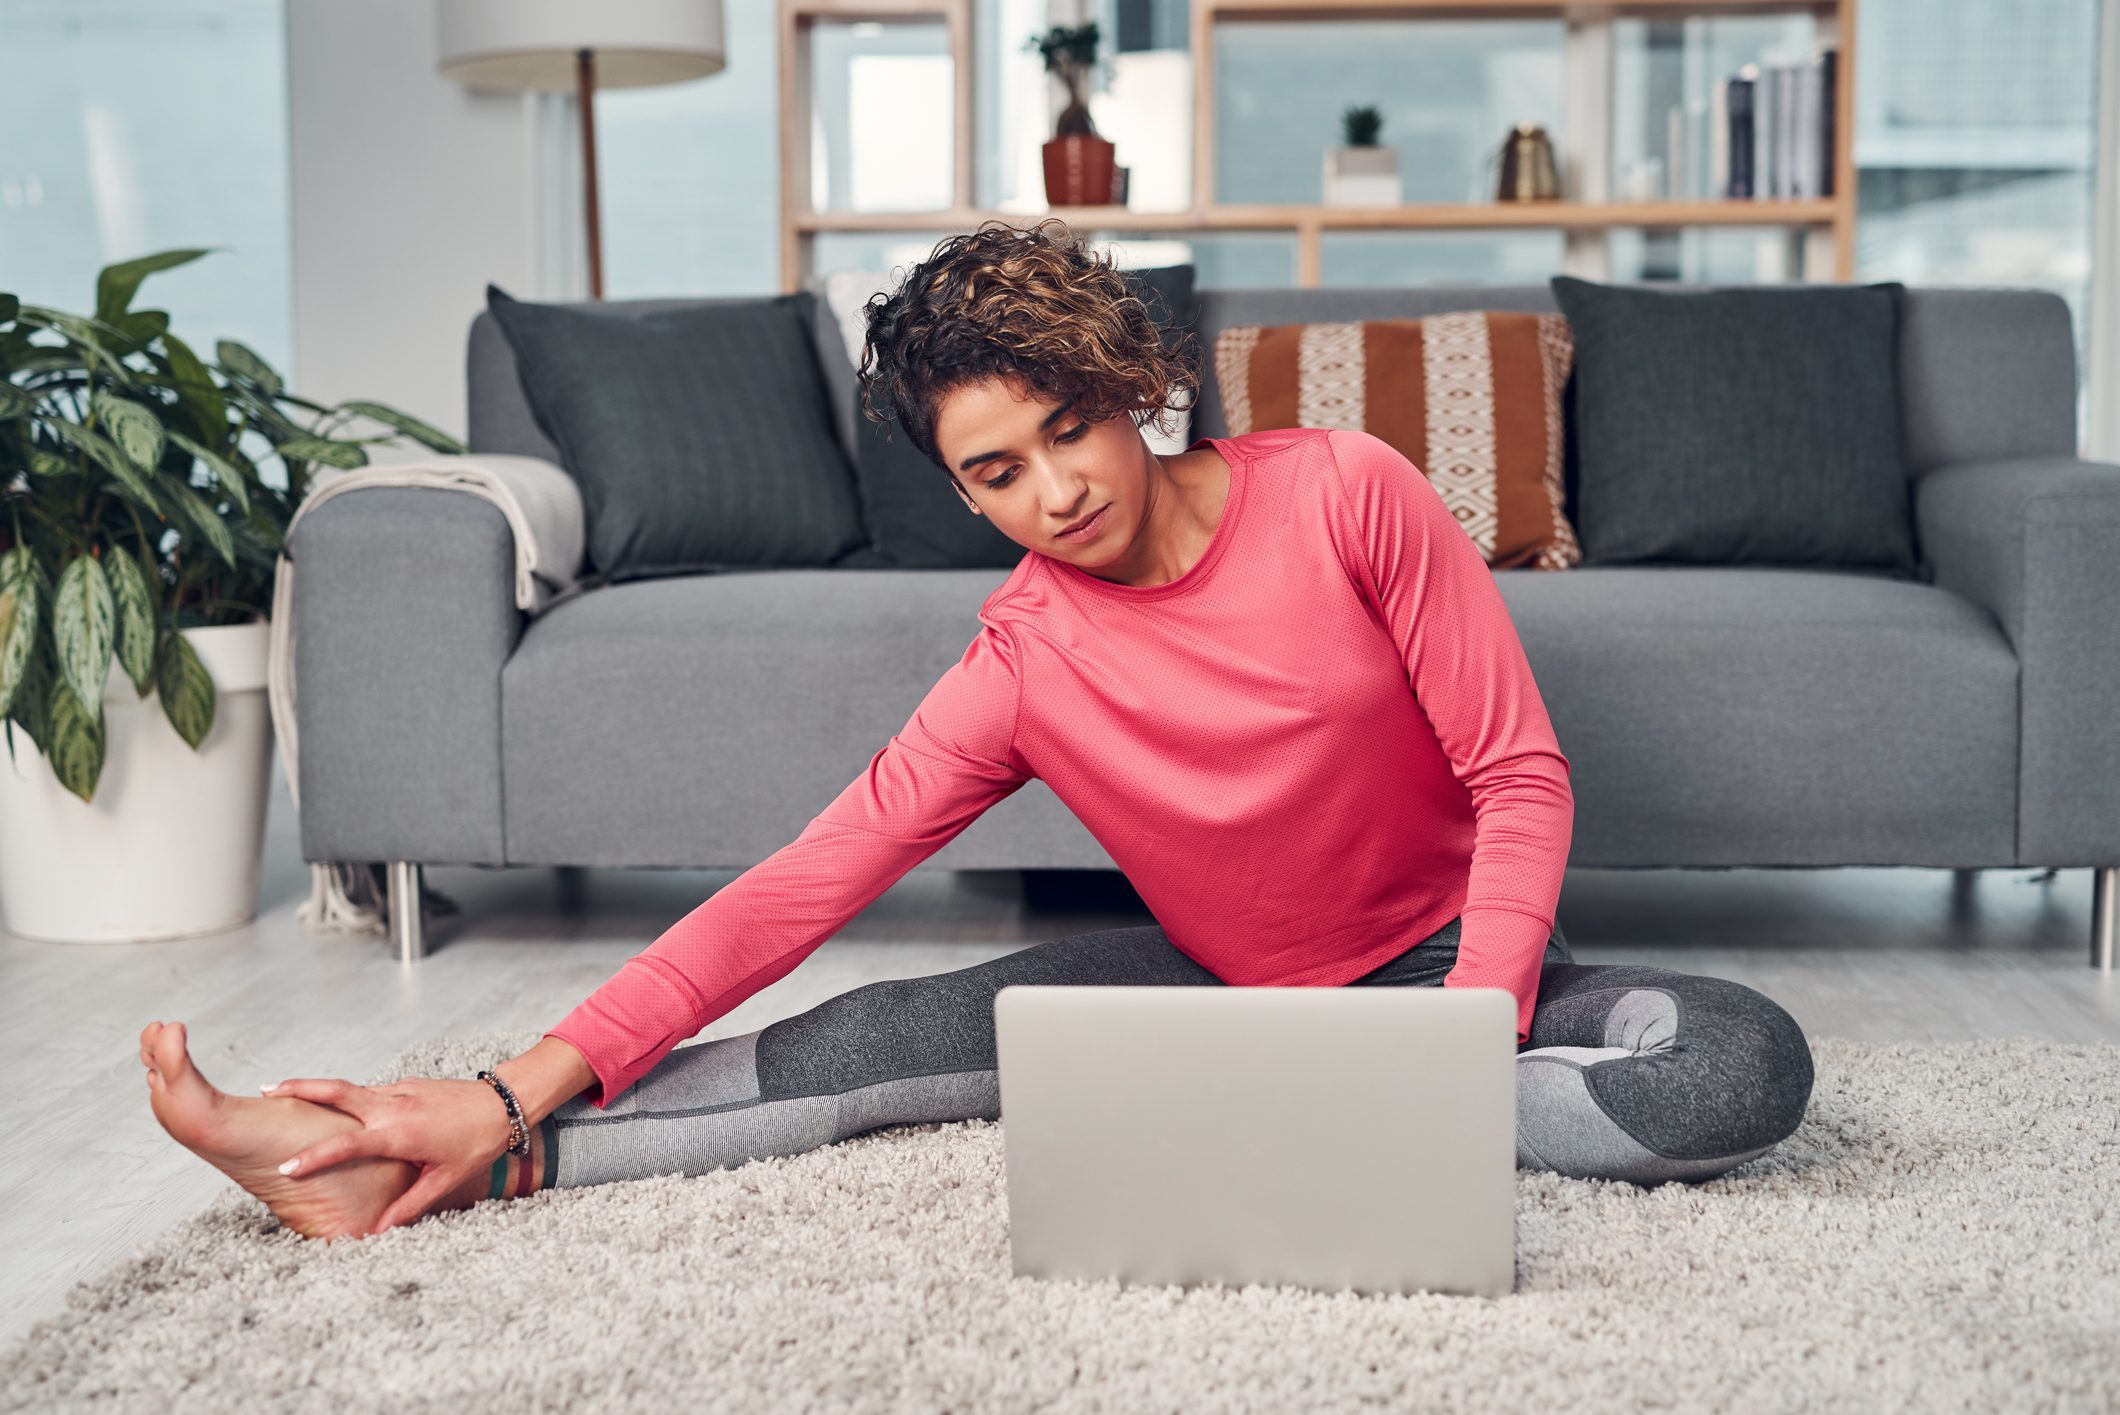 A woman sitting on the floor in athleisure with a laptop in her lap.